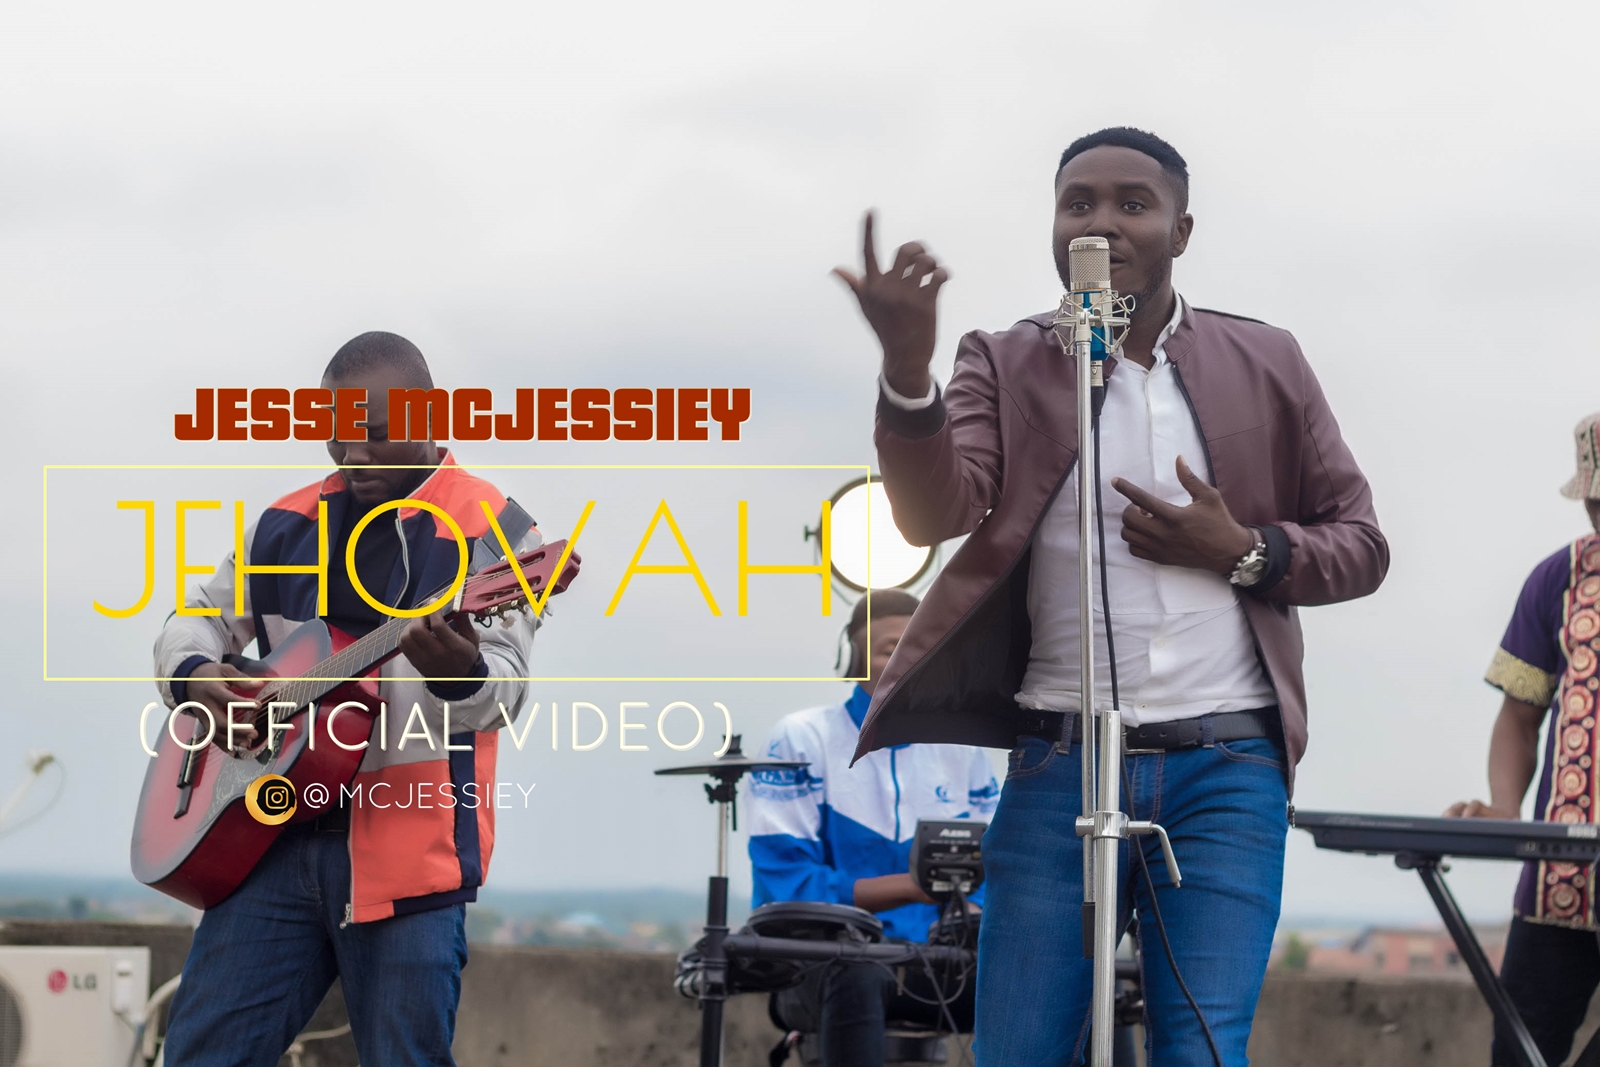 JESSE MCJESSIEY JEHOVAH OFFICIAL VIDEO